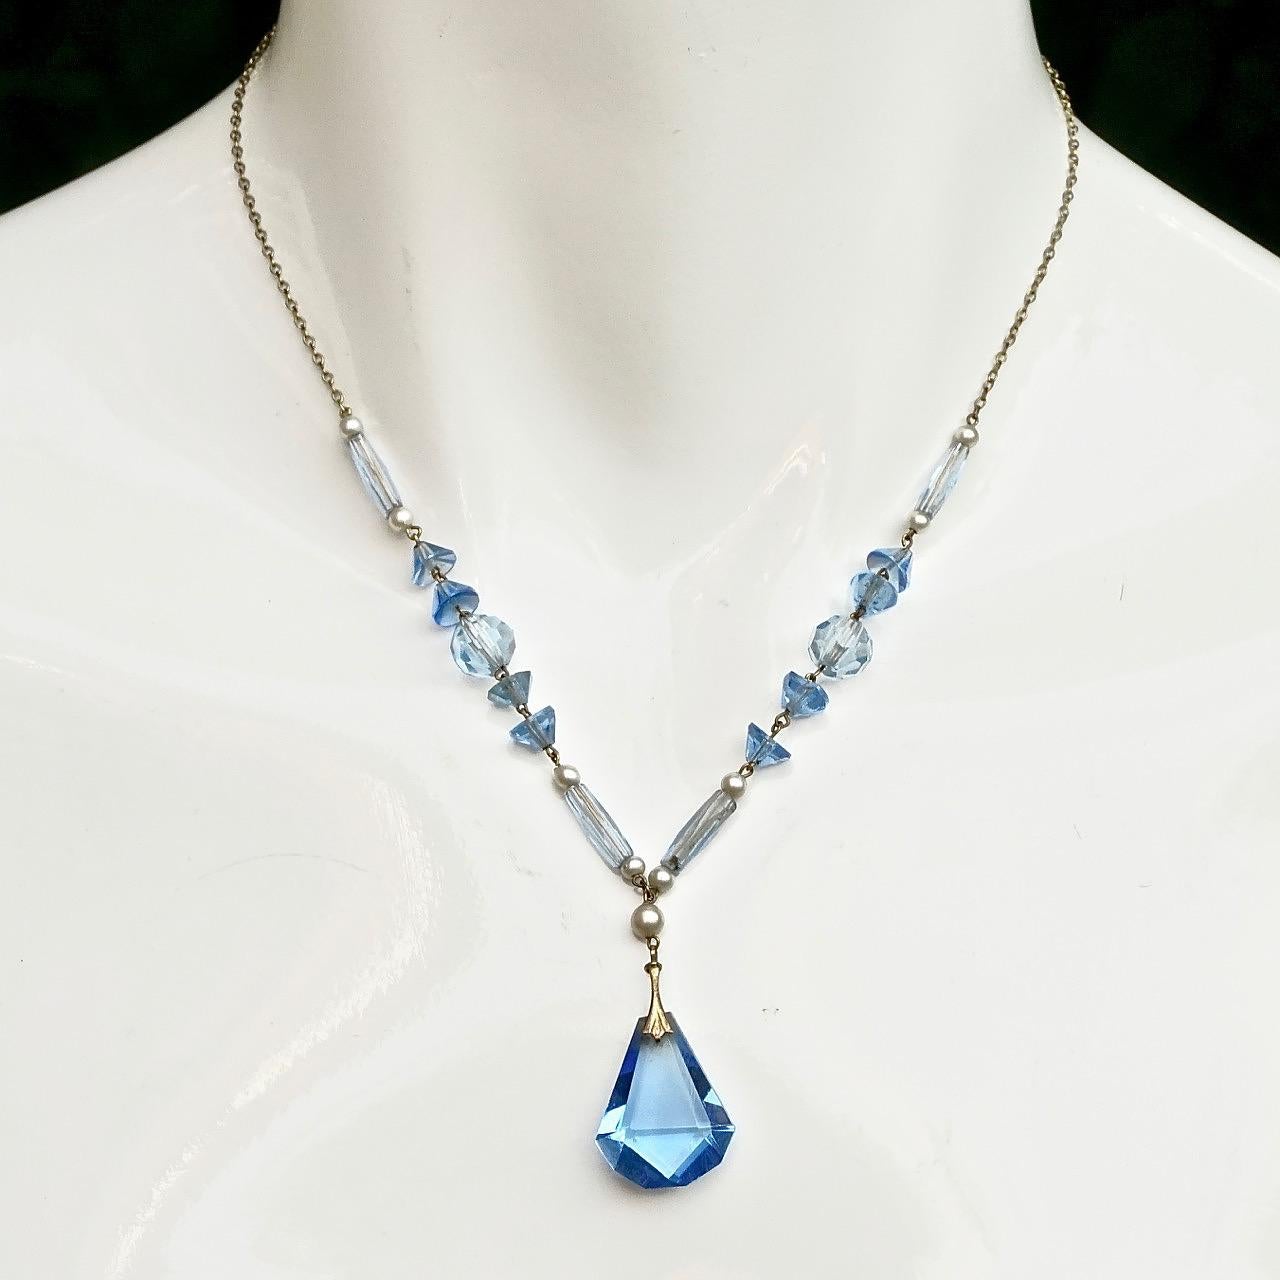 Art Deco Gold Tone Blue Glass Faux Pearl Necklace with Drop Pendant For Sale 1